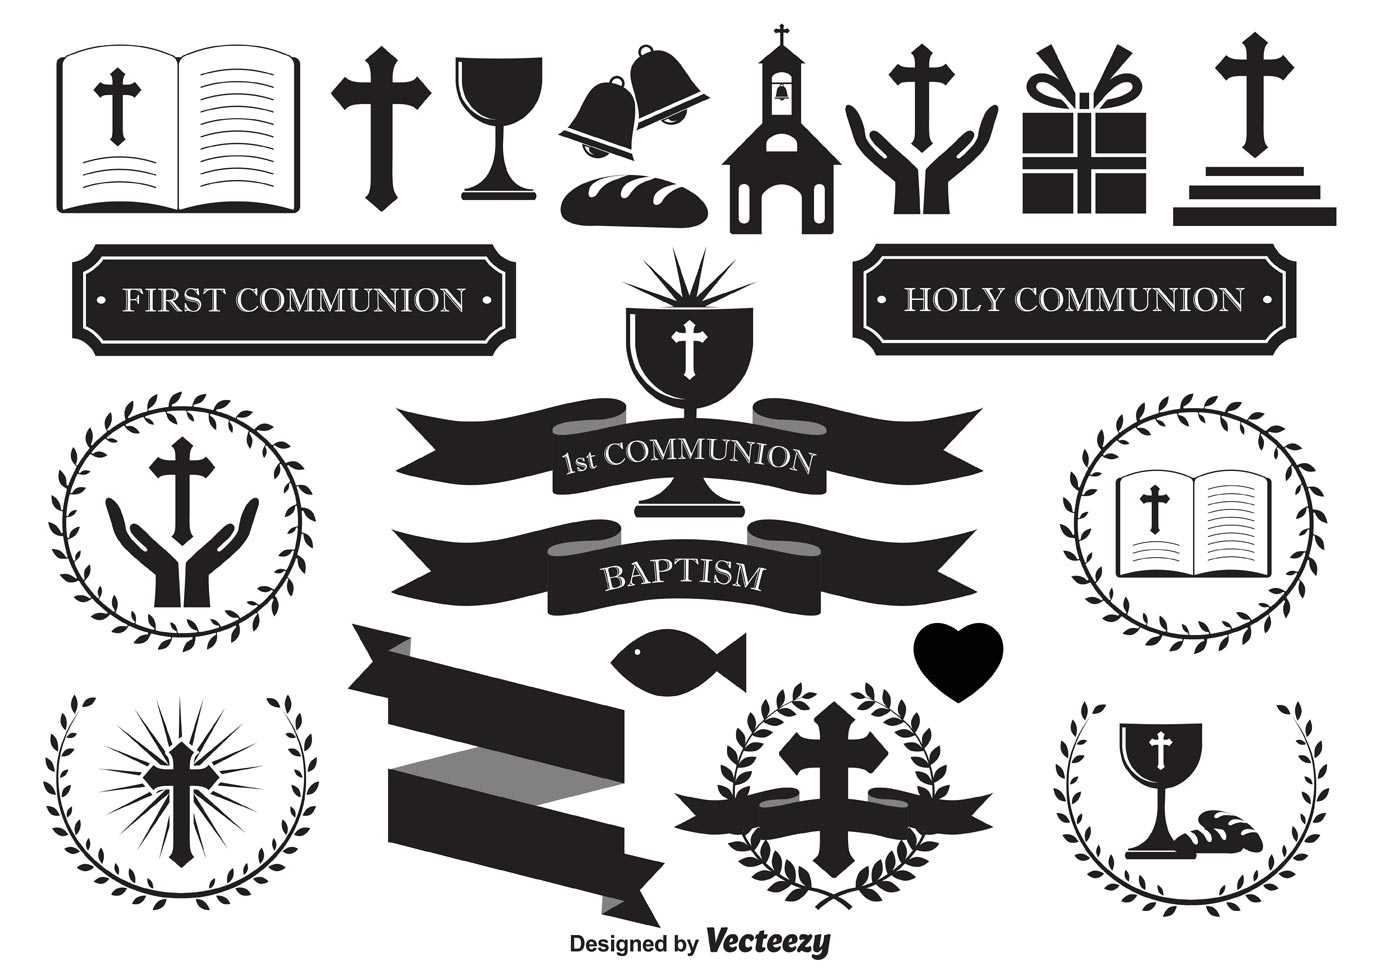 First Communion Free Vector Art – (882 Free Downloads) Within First Communion Banner Templates